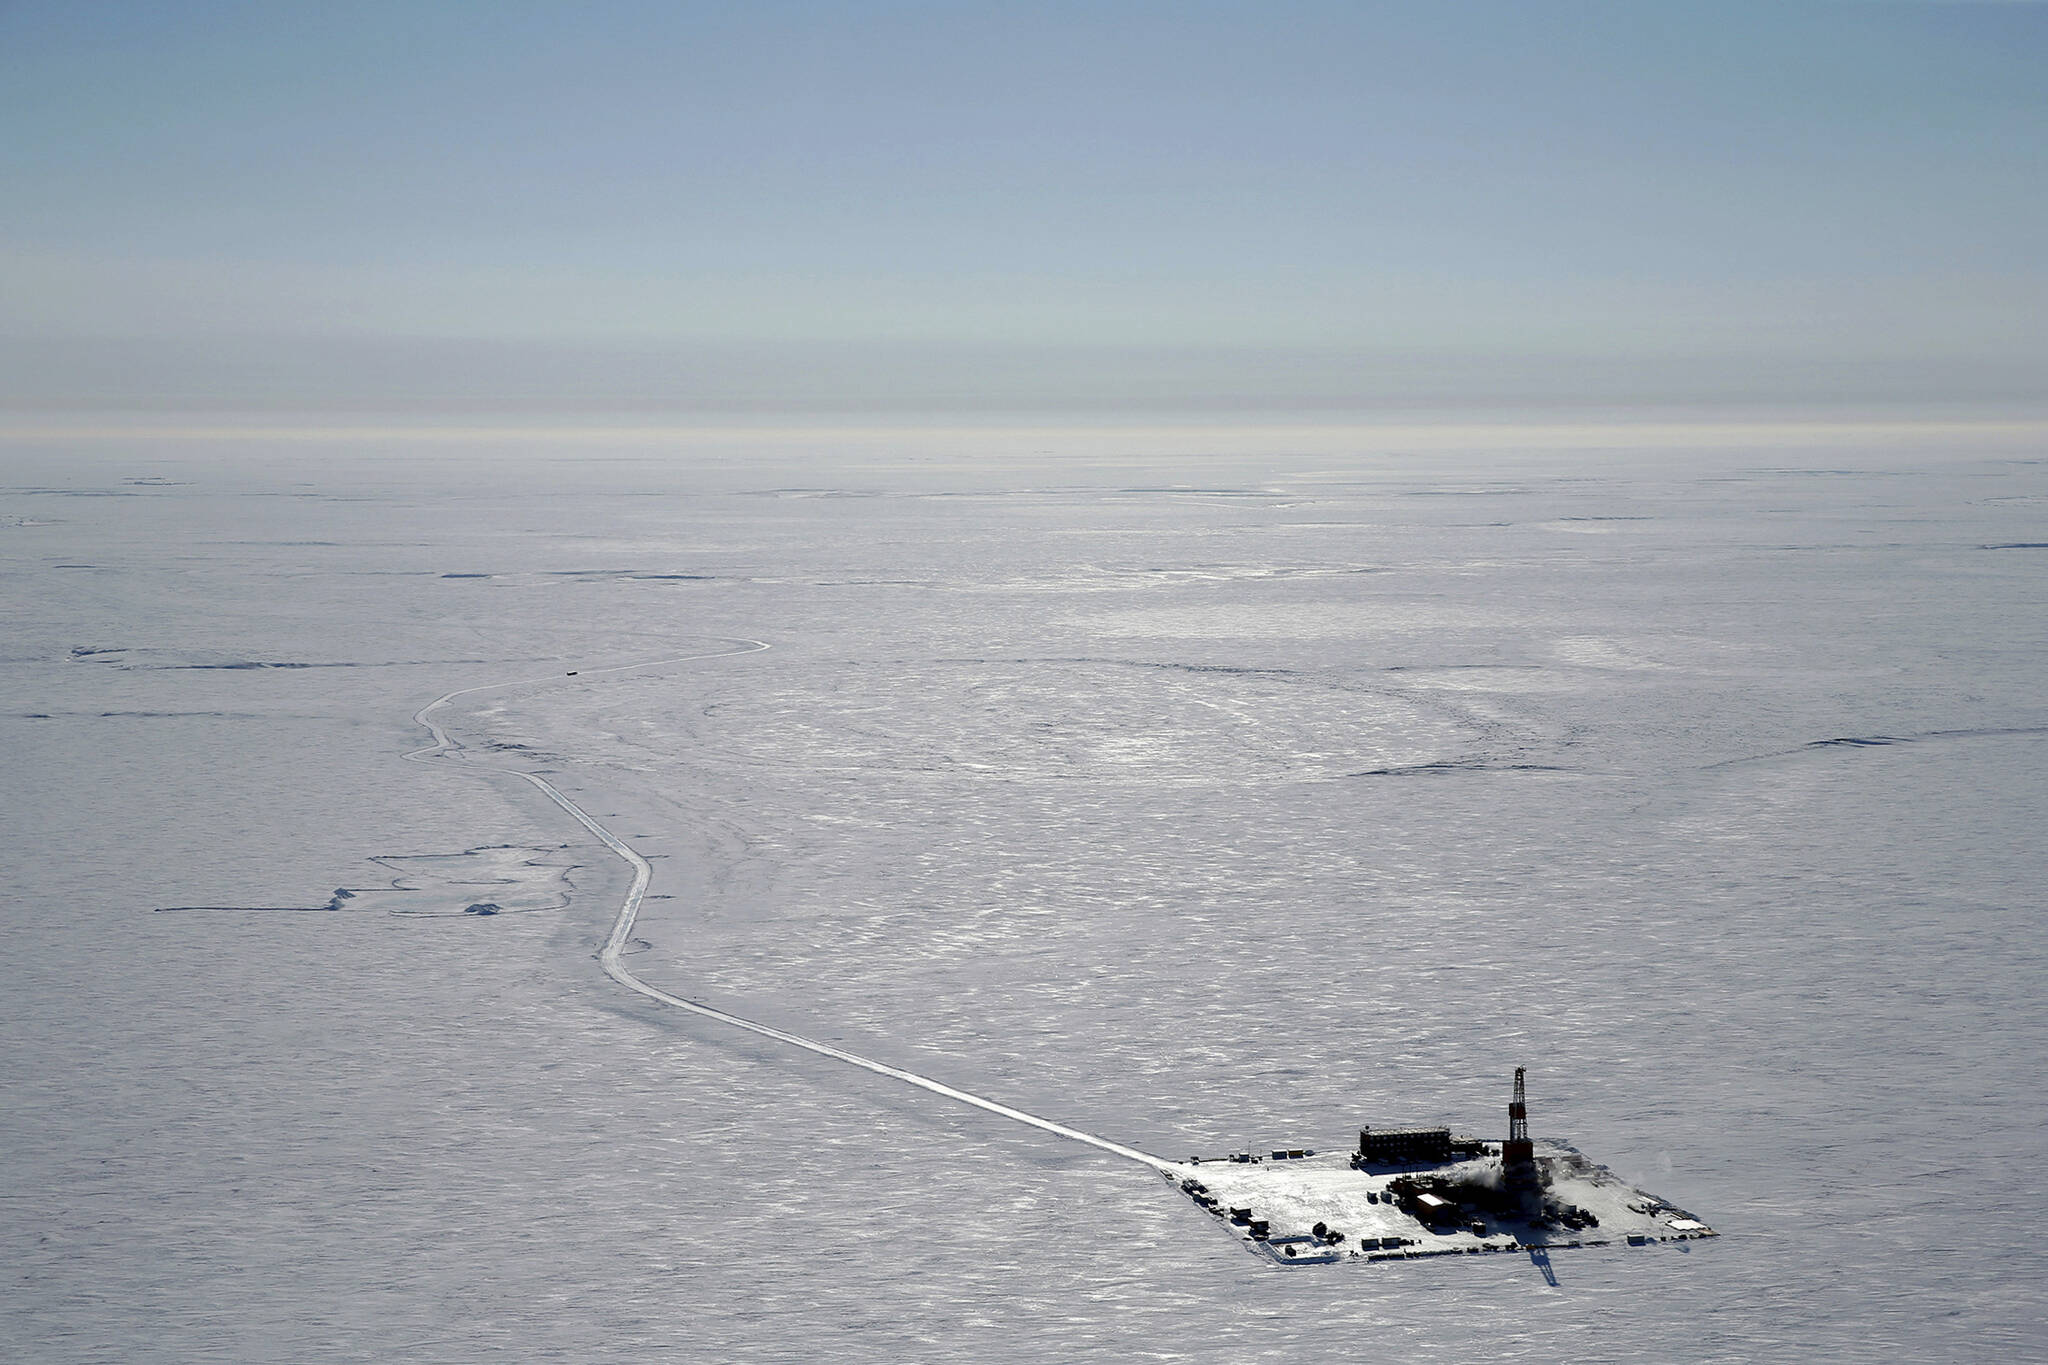 This 2019 aerial photo provided by ConocoPhillips shows an exploratory drilling camp at the proposed site of the Willow oil project on Alaska’s North Slope. The Biden administration is weighing approval of a major oil project on Alaska’s petroleum-rich North Slope that supporters say represents an economic lifeline for Indigenous communities in the region but environmentalists say is counter to Biden’s climate goals. A decision on ConocoPhillips Alaska’s Willow project, in a federal oil reserve roughly the size of Indiana, could come by early March 2023. (ConocoPhillips via AP, File)